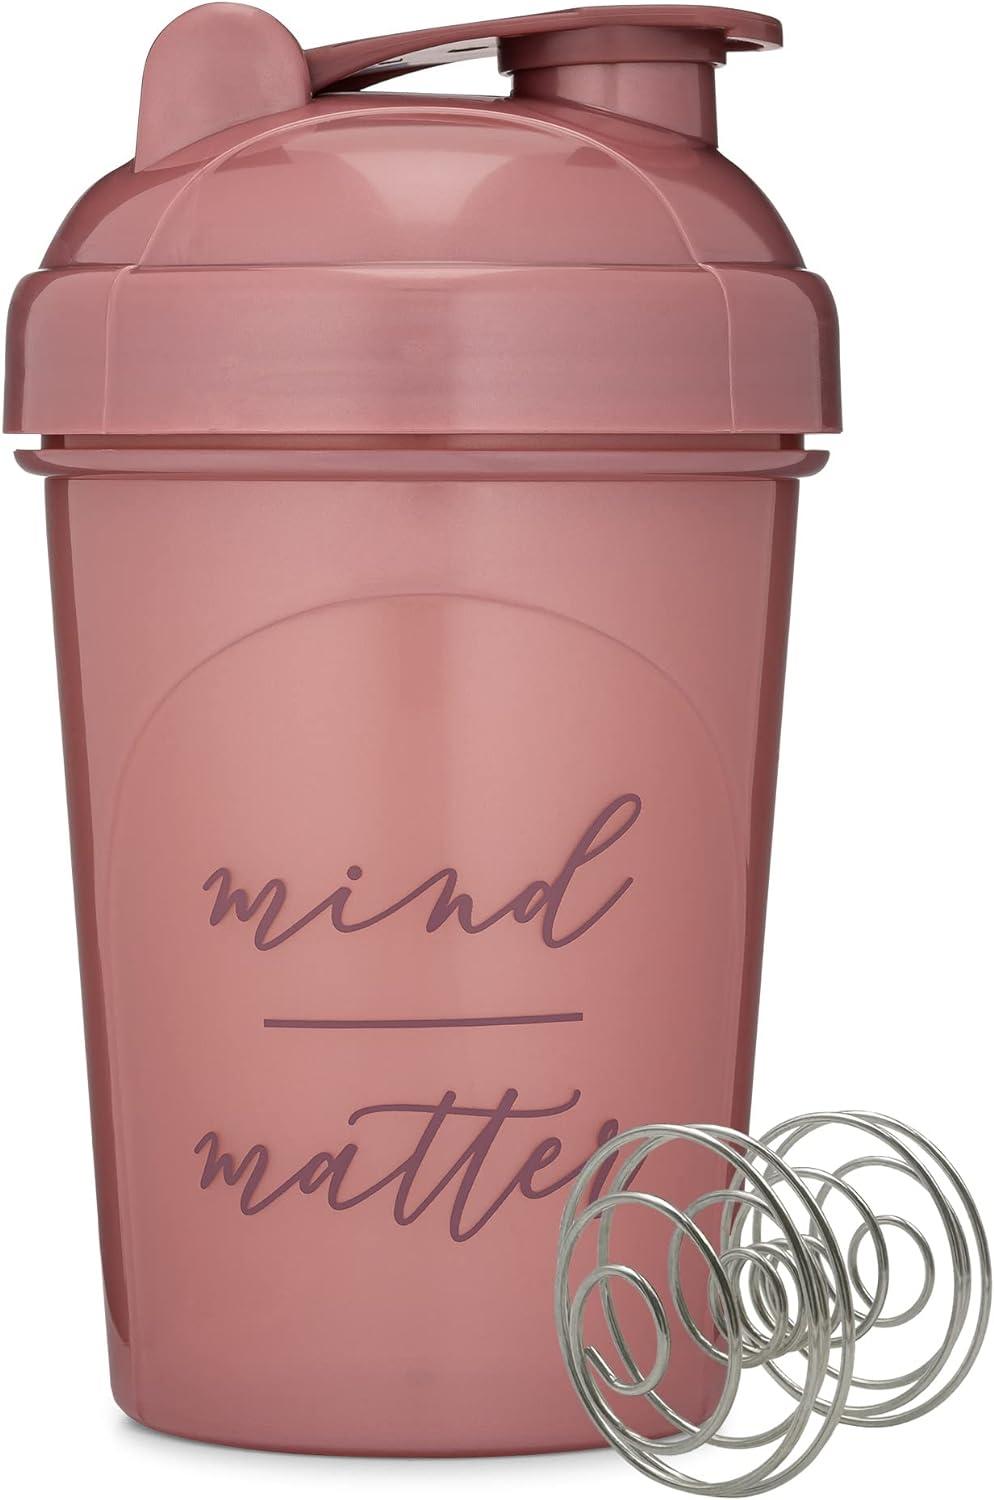 2 Pack 20-Ounce Shaker Bottle with Motivational Quotes (Be You Plum & Mind  Over Matter Rose), Protein Shaker Bottle with Mixer Agitators